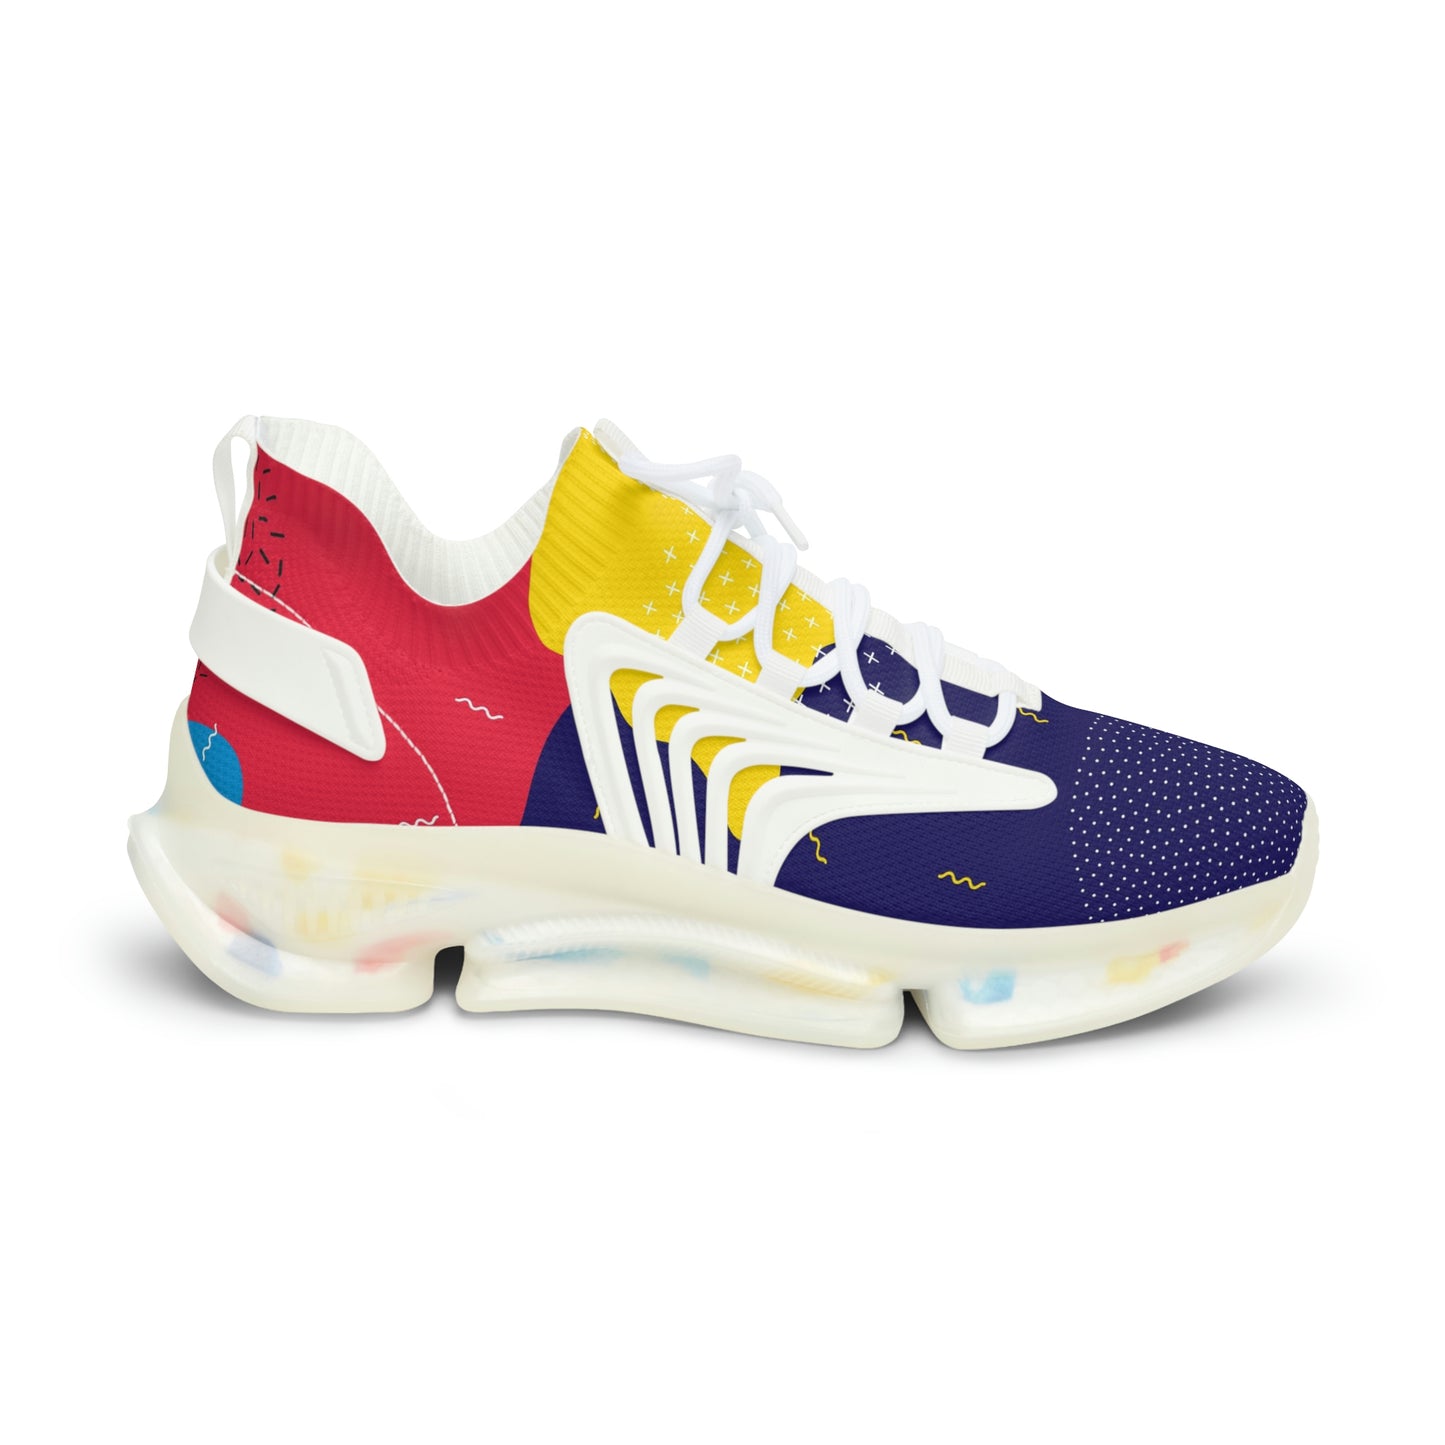 Red / Yellow / Navy Blue - Men's Mesh Sports Sneakers